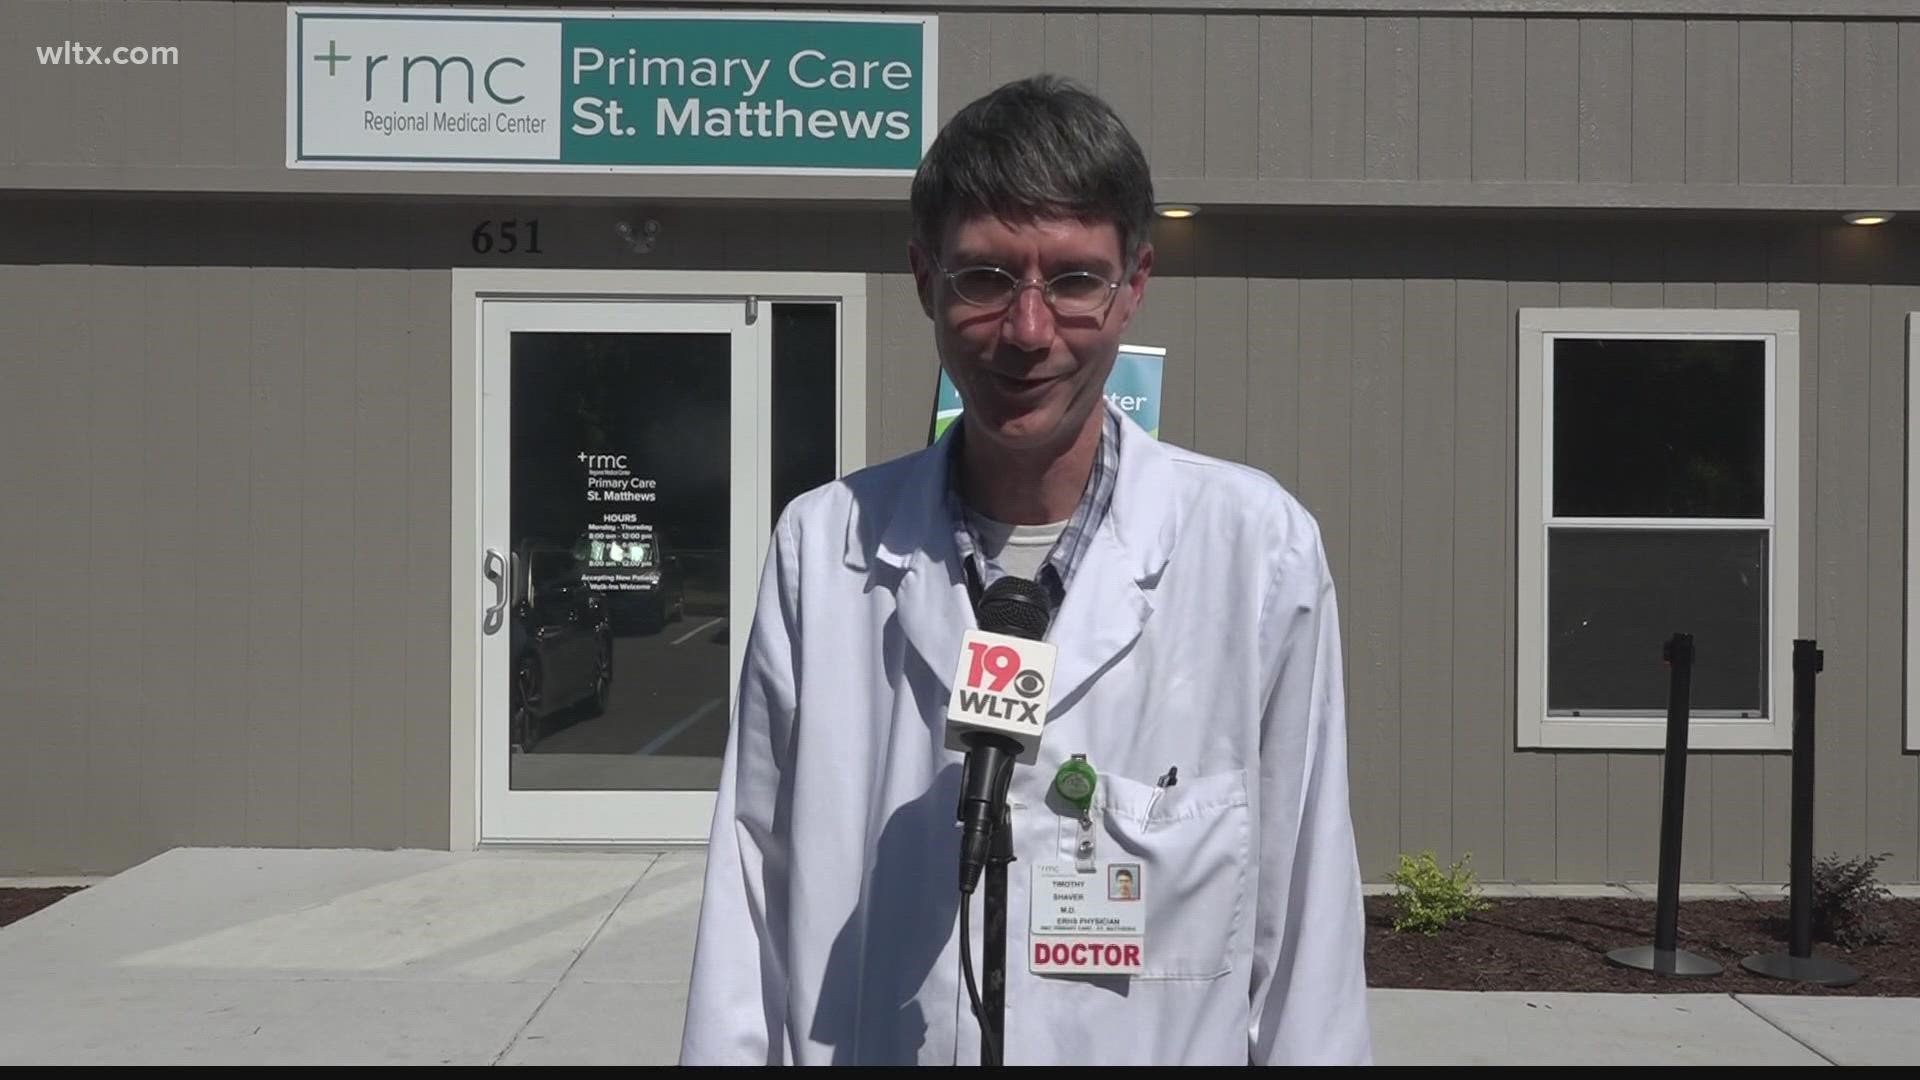 The Regional Medical Center opened a new primary care healthplex in St. Matthews on Wednesday.